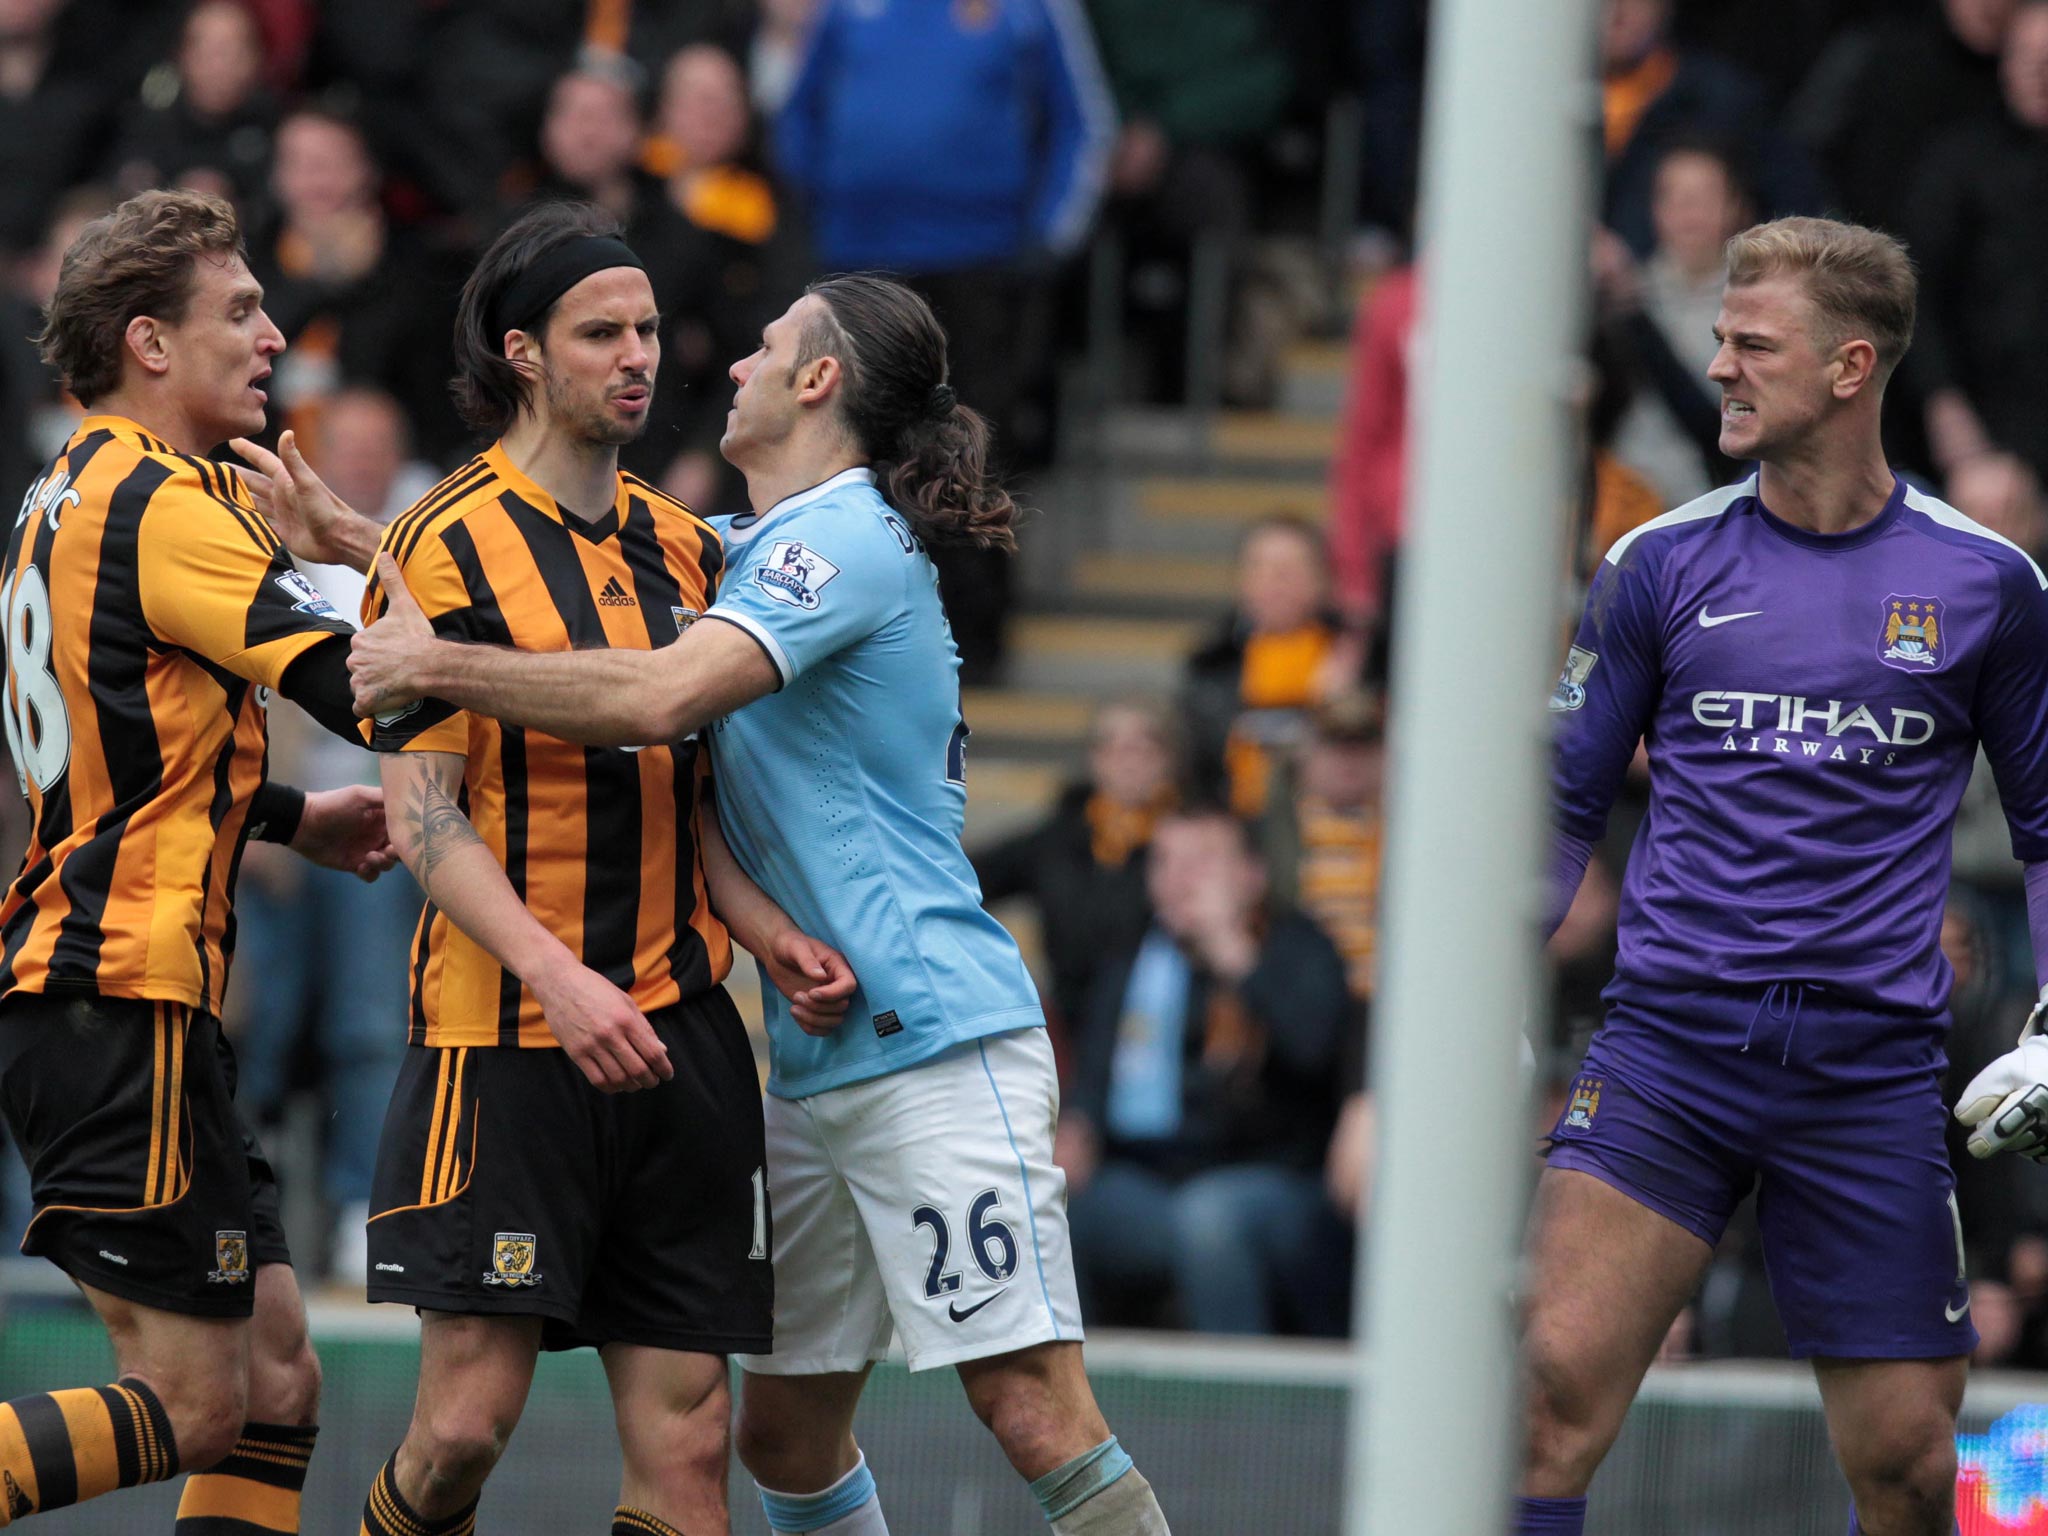 George Boyd has been banned for three matches by the FA for spitting at Manchester City goalkeeper Joe Hart